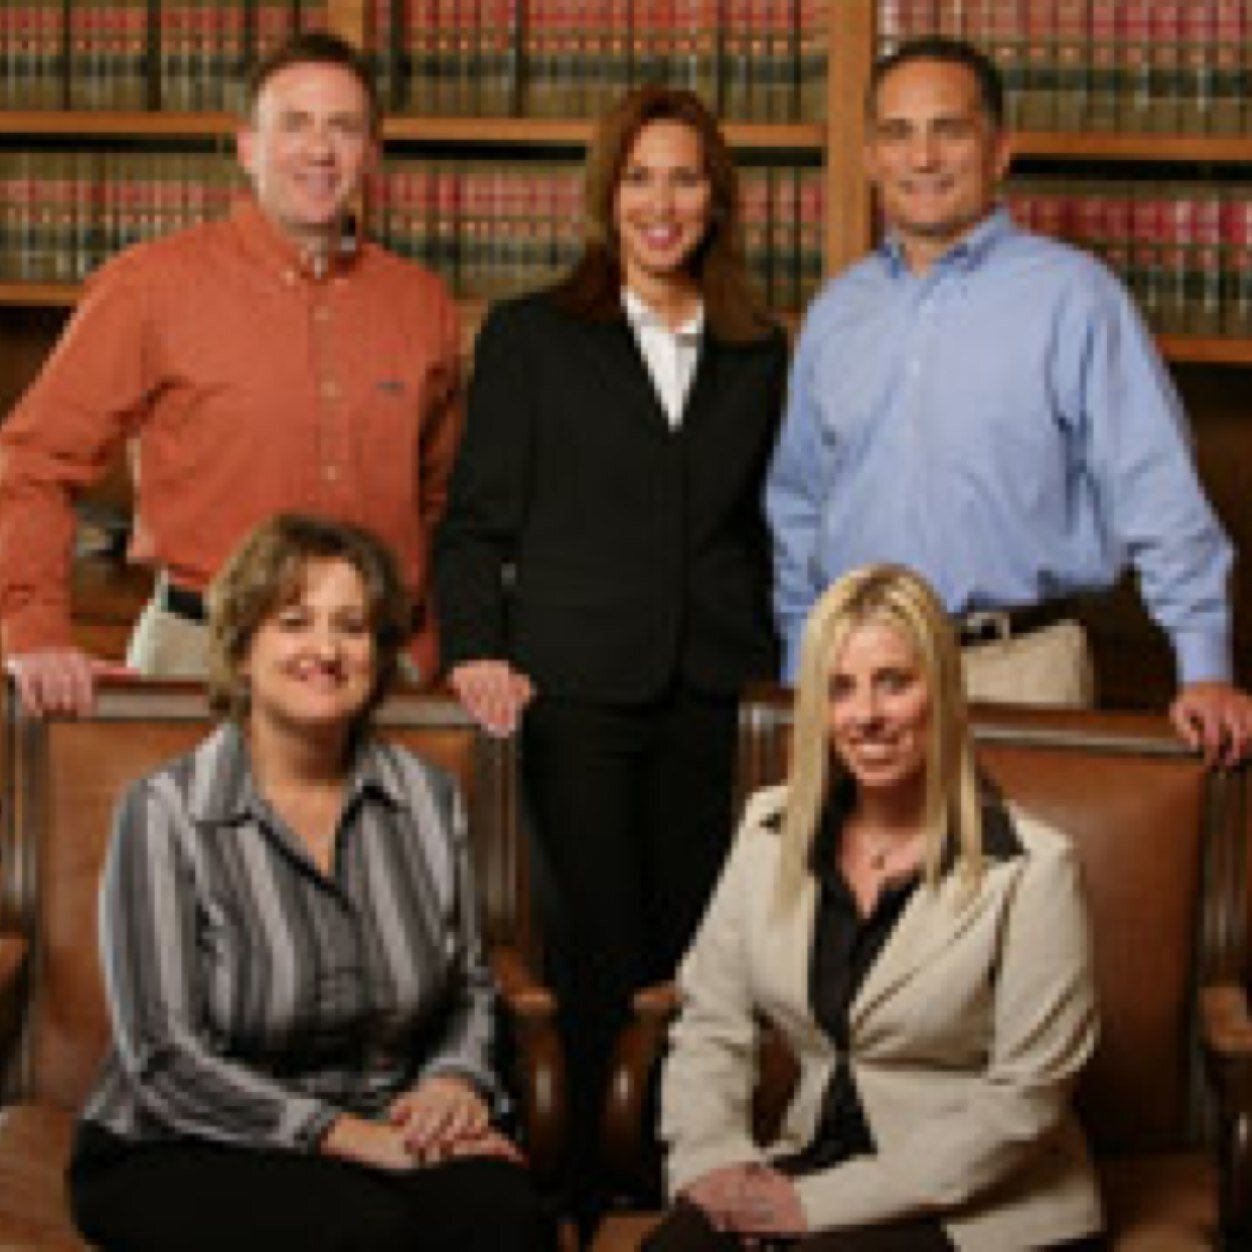 The Experienced Lawfirm of Keberle & Patrykus Proudly Serving Washington County Wisconsin. If your hurt, we are here to help.